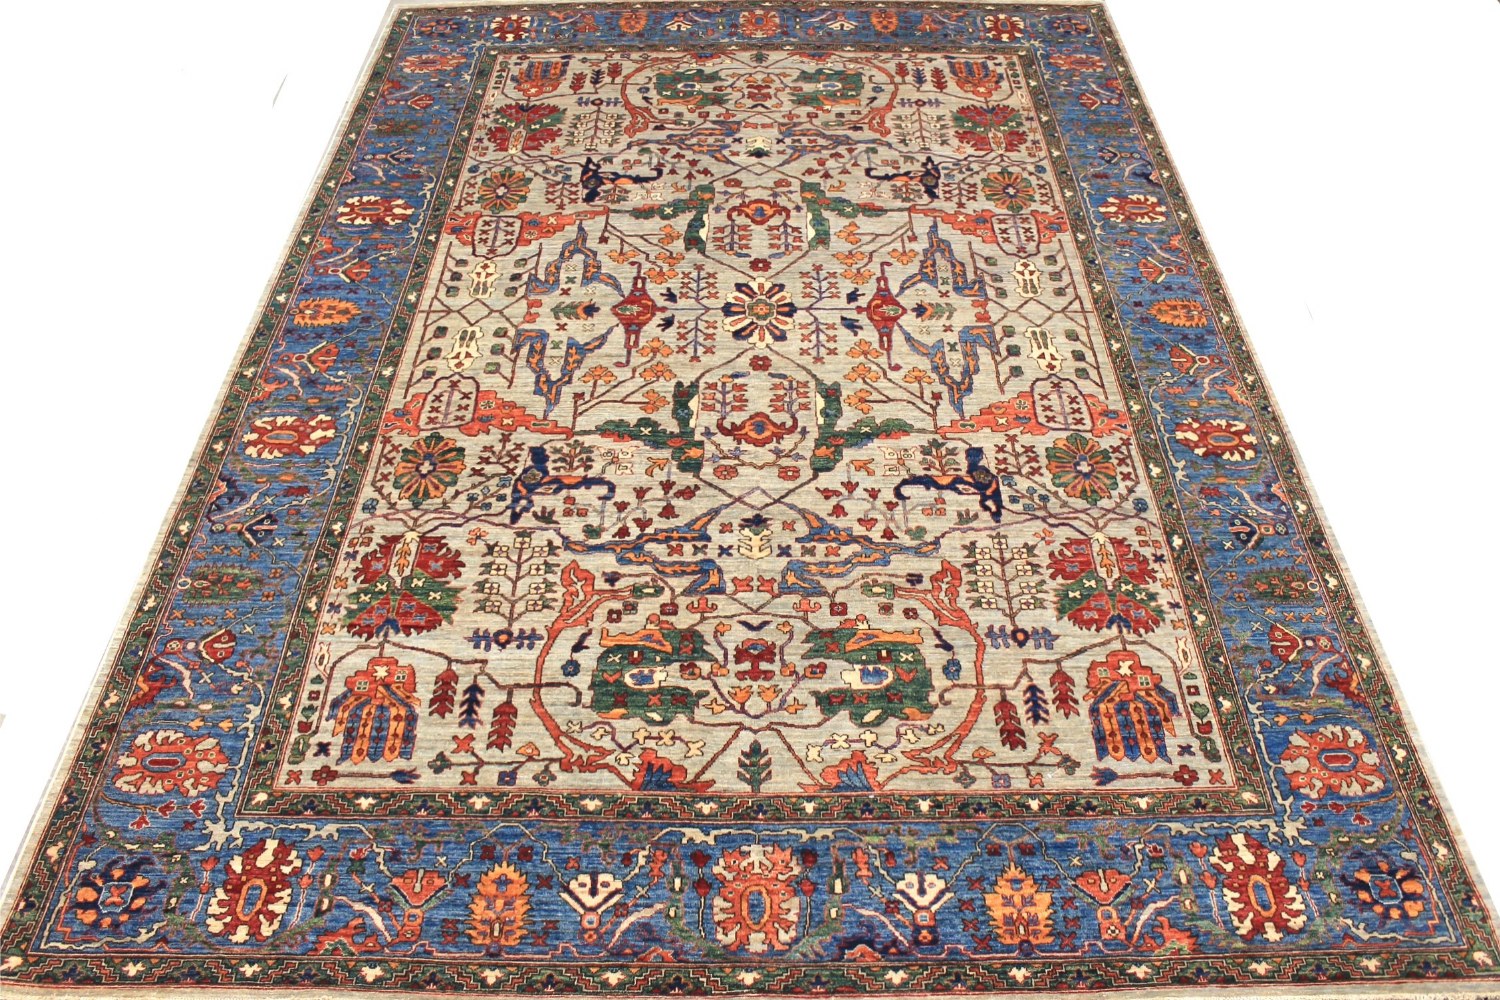 10x14 Aryana & Antique Revivals Hand Knotted Wool Area Rug - MR027840